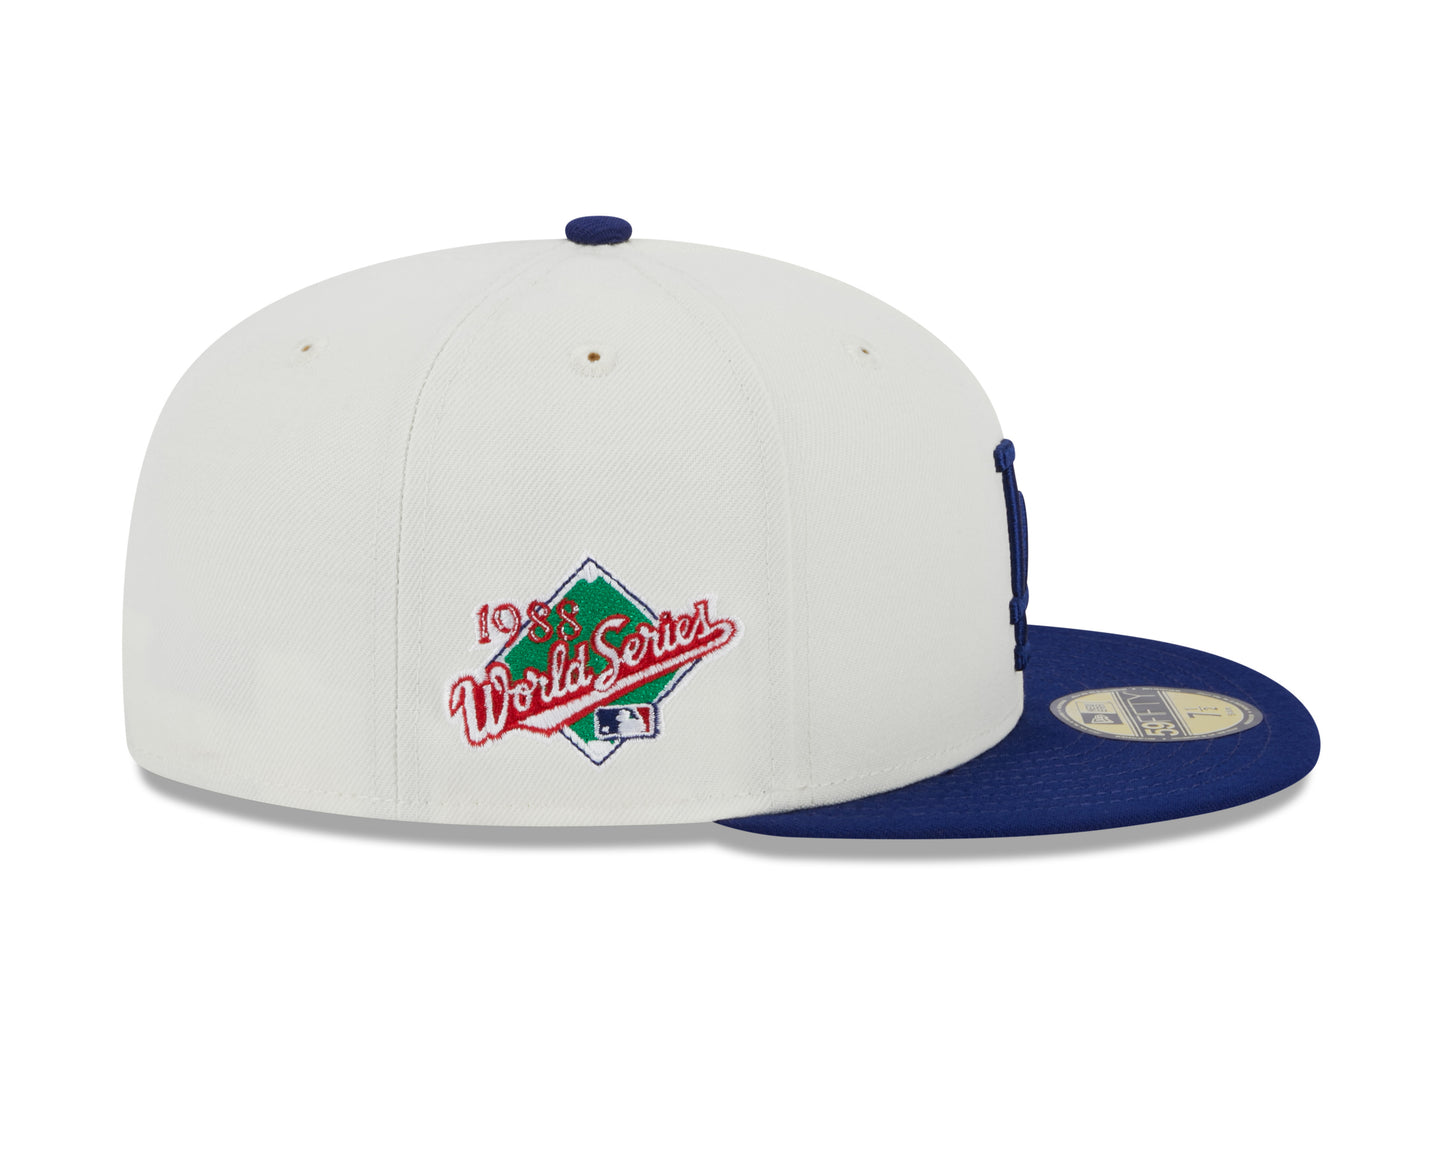 Los Angeles Dodgers 1988 World Series Cream/Royal New Era Retro 59FIFTY Fitted Hat